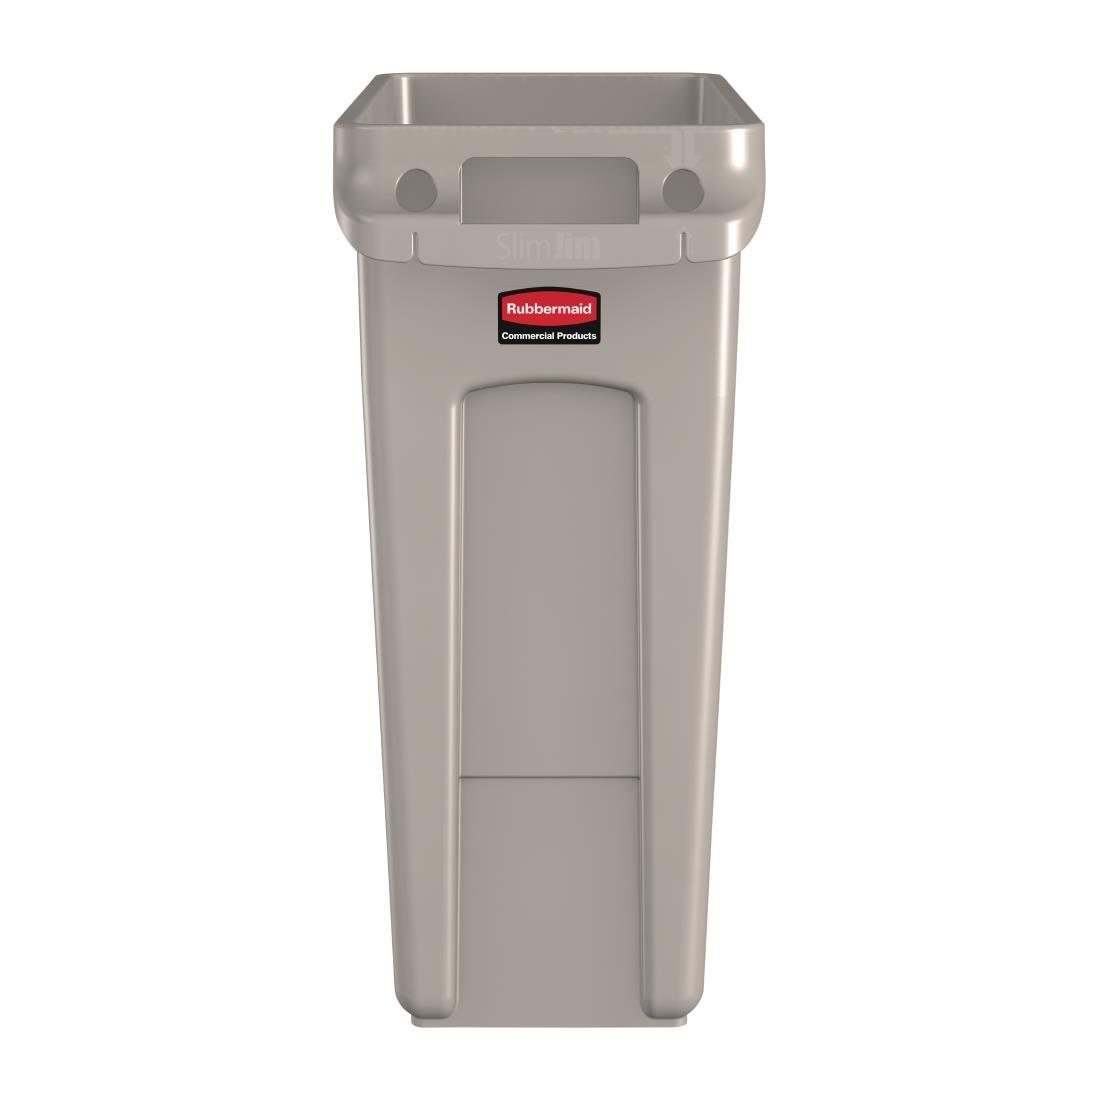 Rubbermaid Slim Jim Container With Venting Channels Beige 60Ltr - DY112  - 2